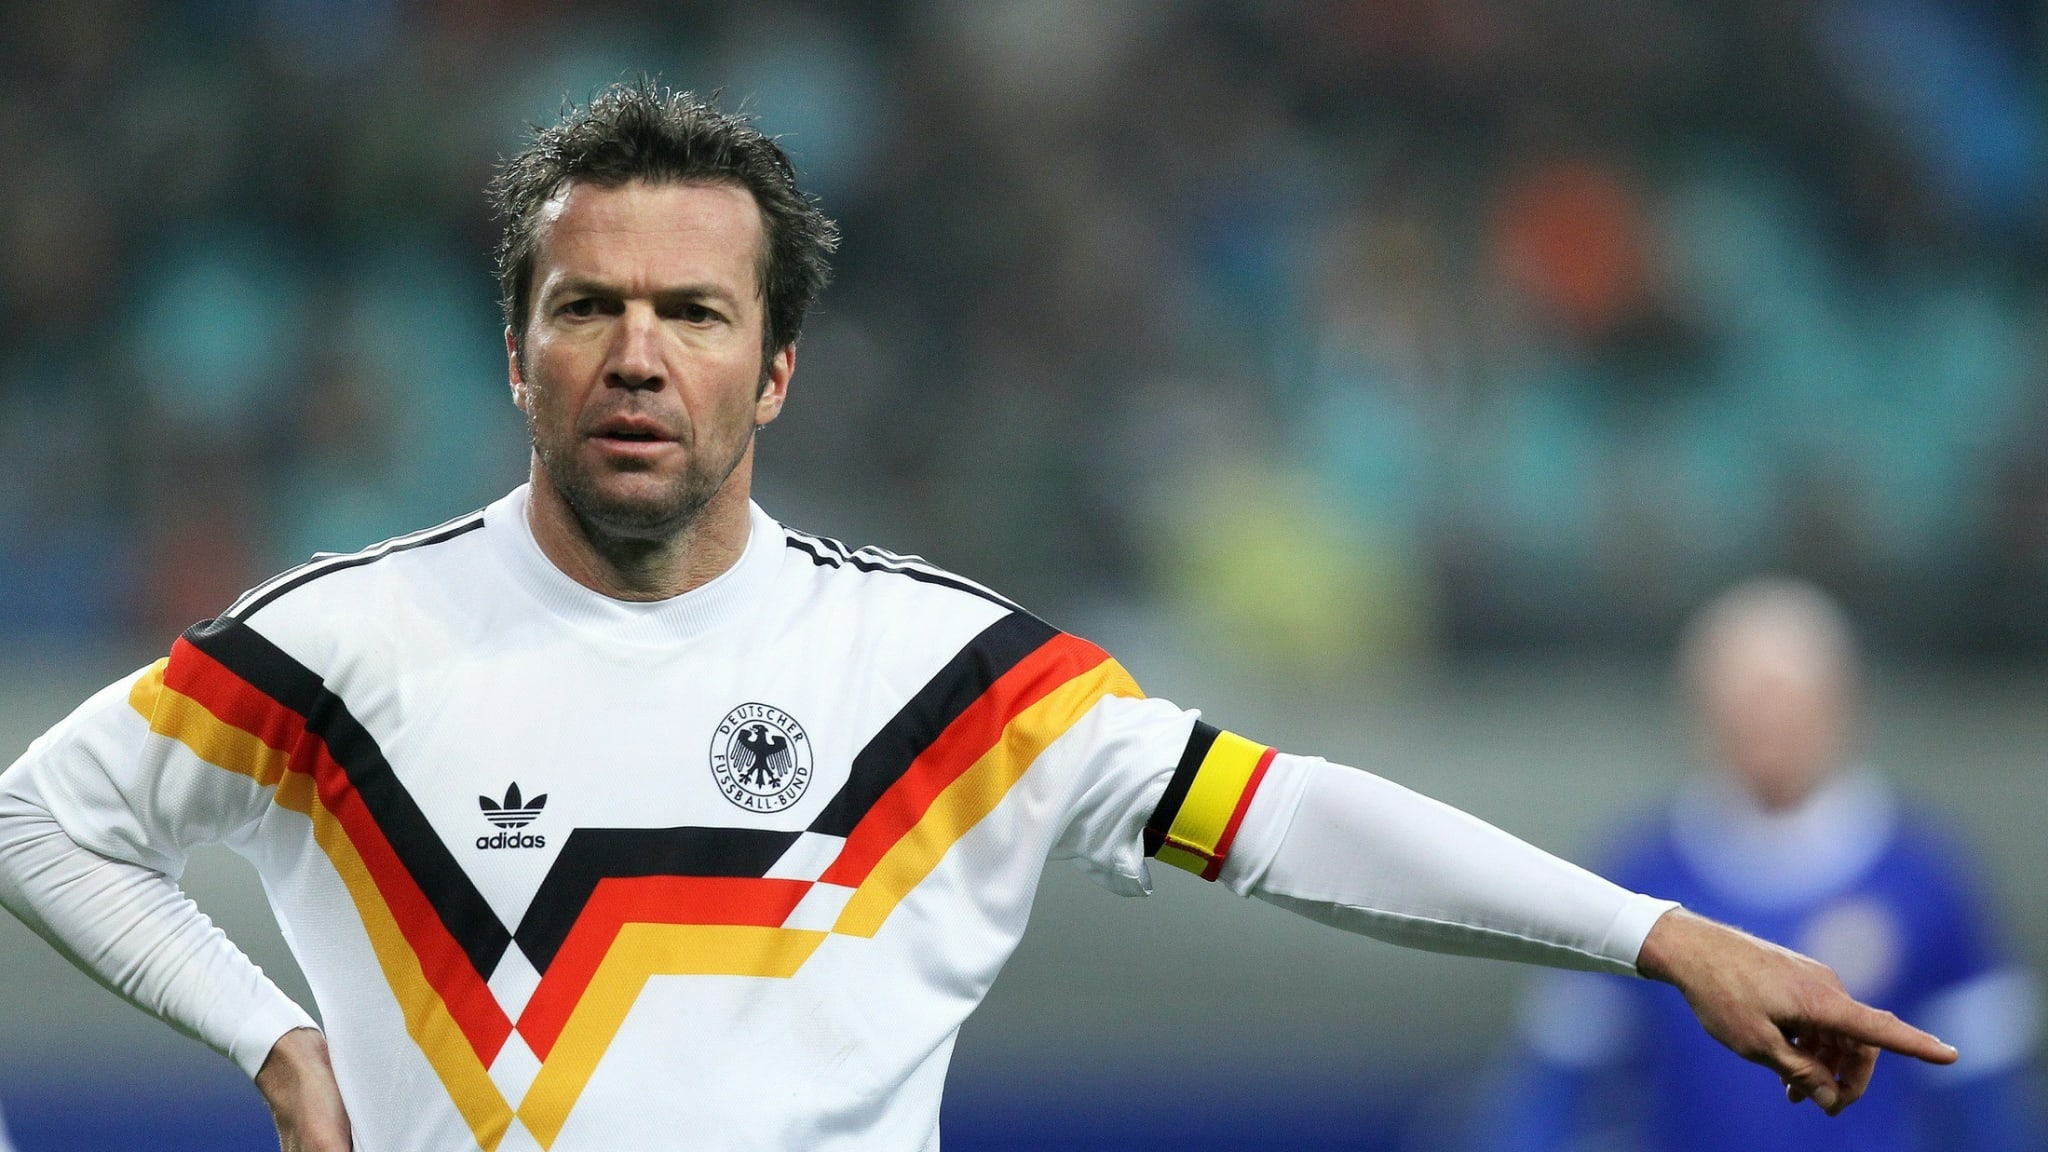 UtdArena Lothar Matthäus Won The Then European Centric Ballon D'Or Award After Captaining West Germany To World Cup Victory. A Year Later, After A Stellar Season With Internazionale, He